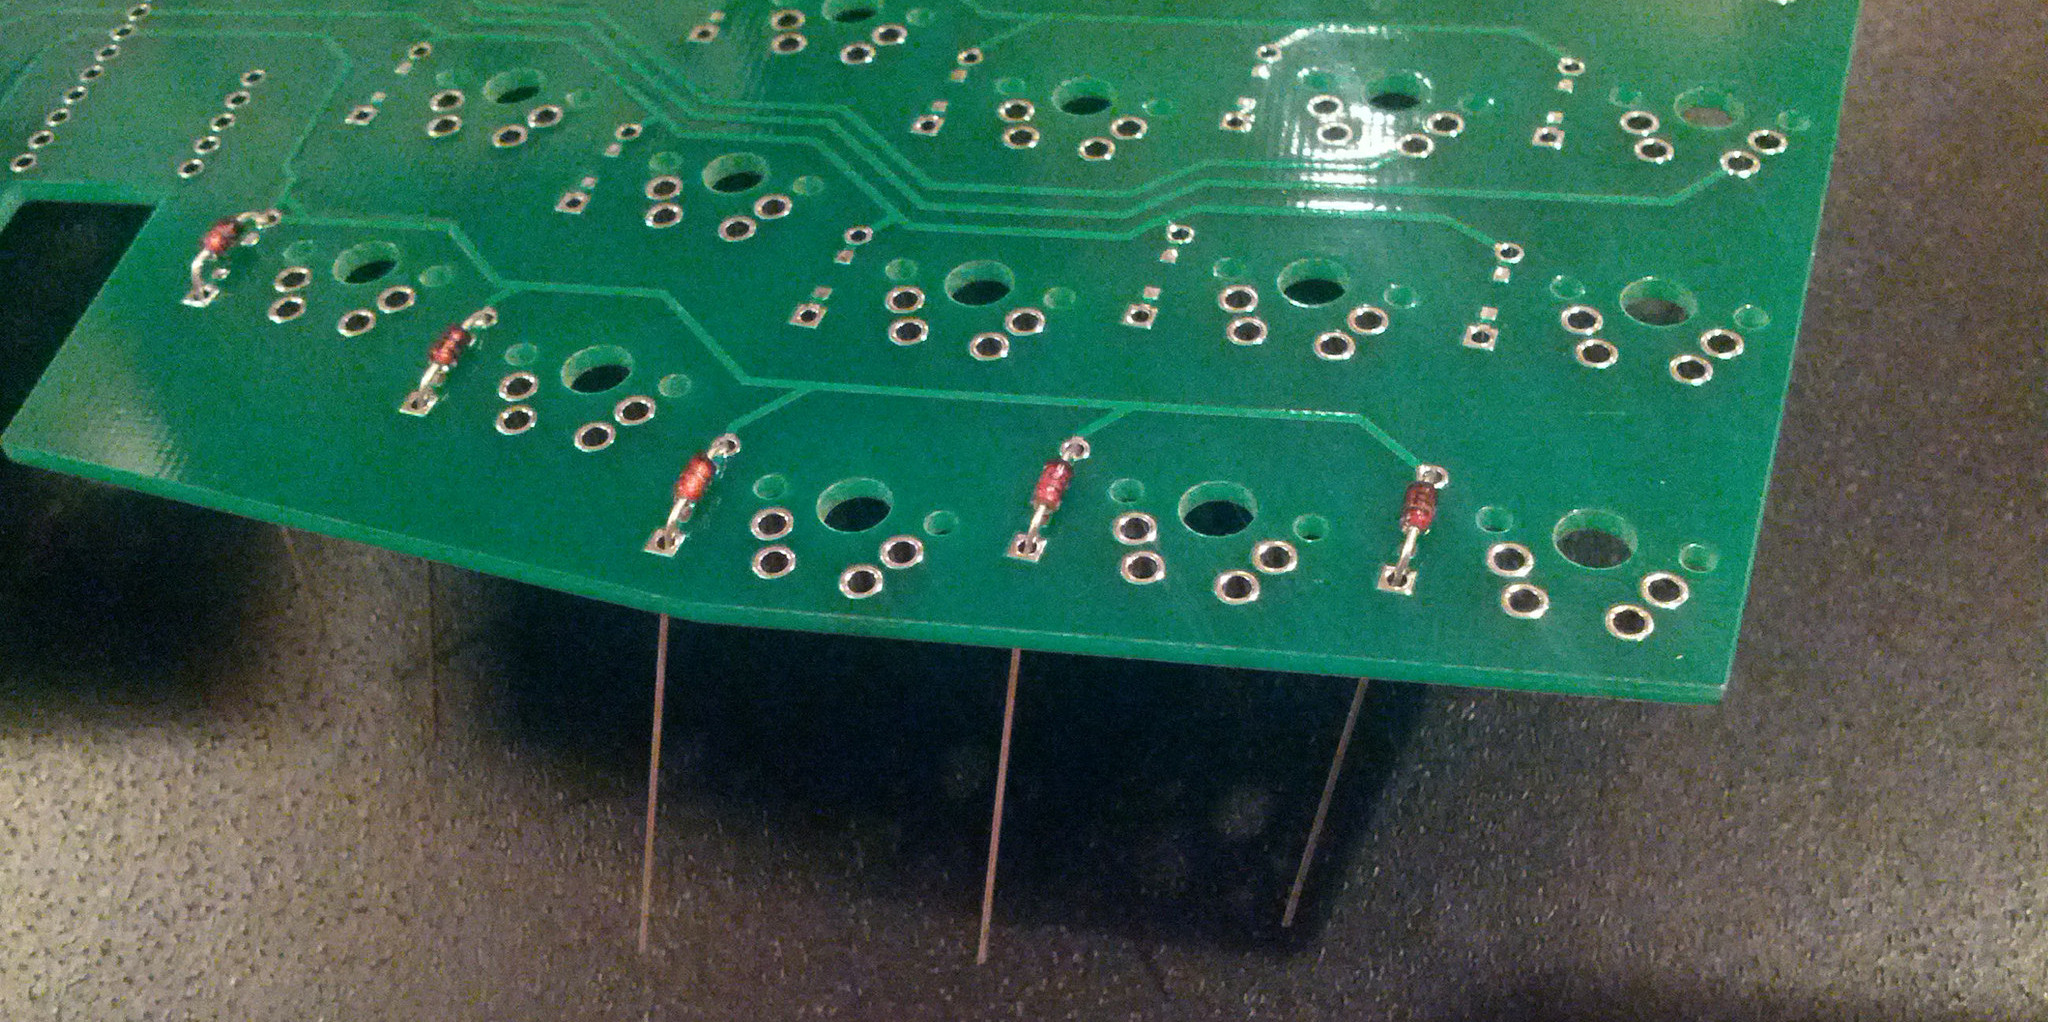 assembly/diodes.jpg